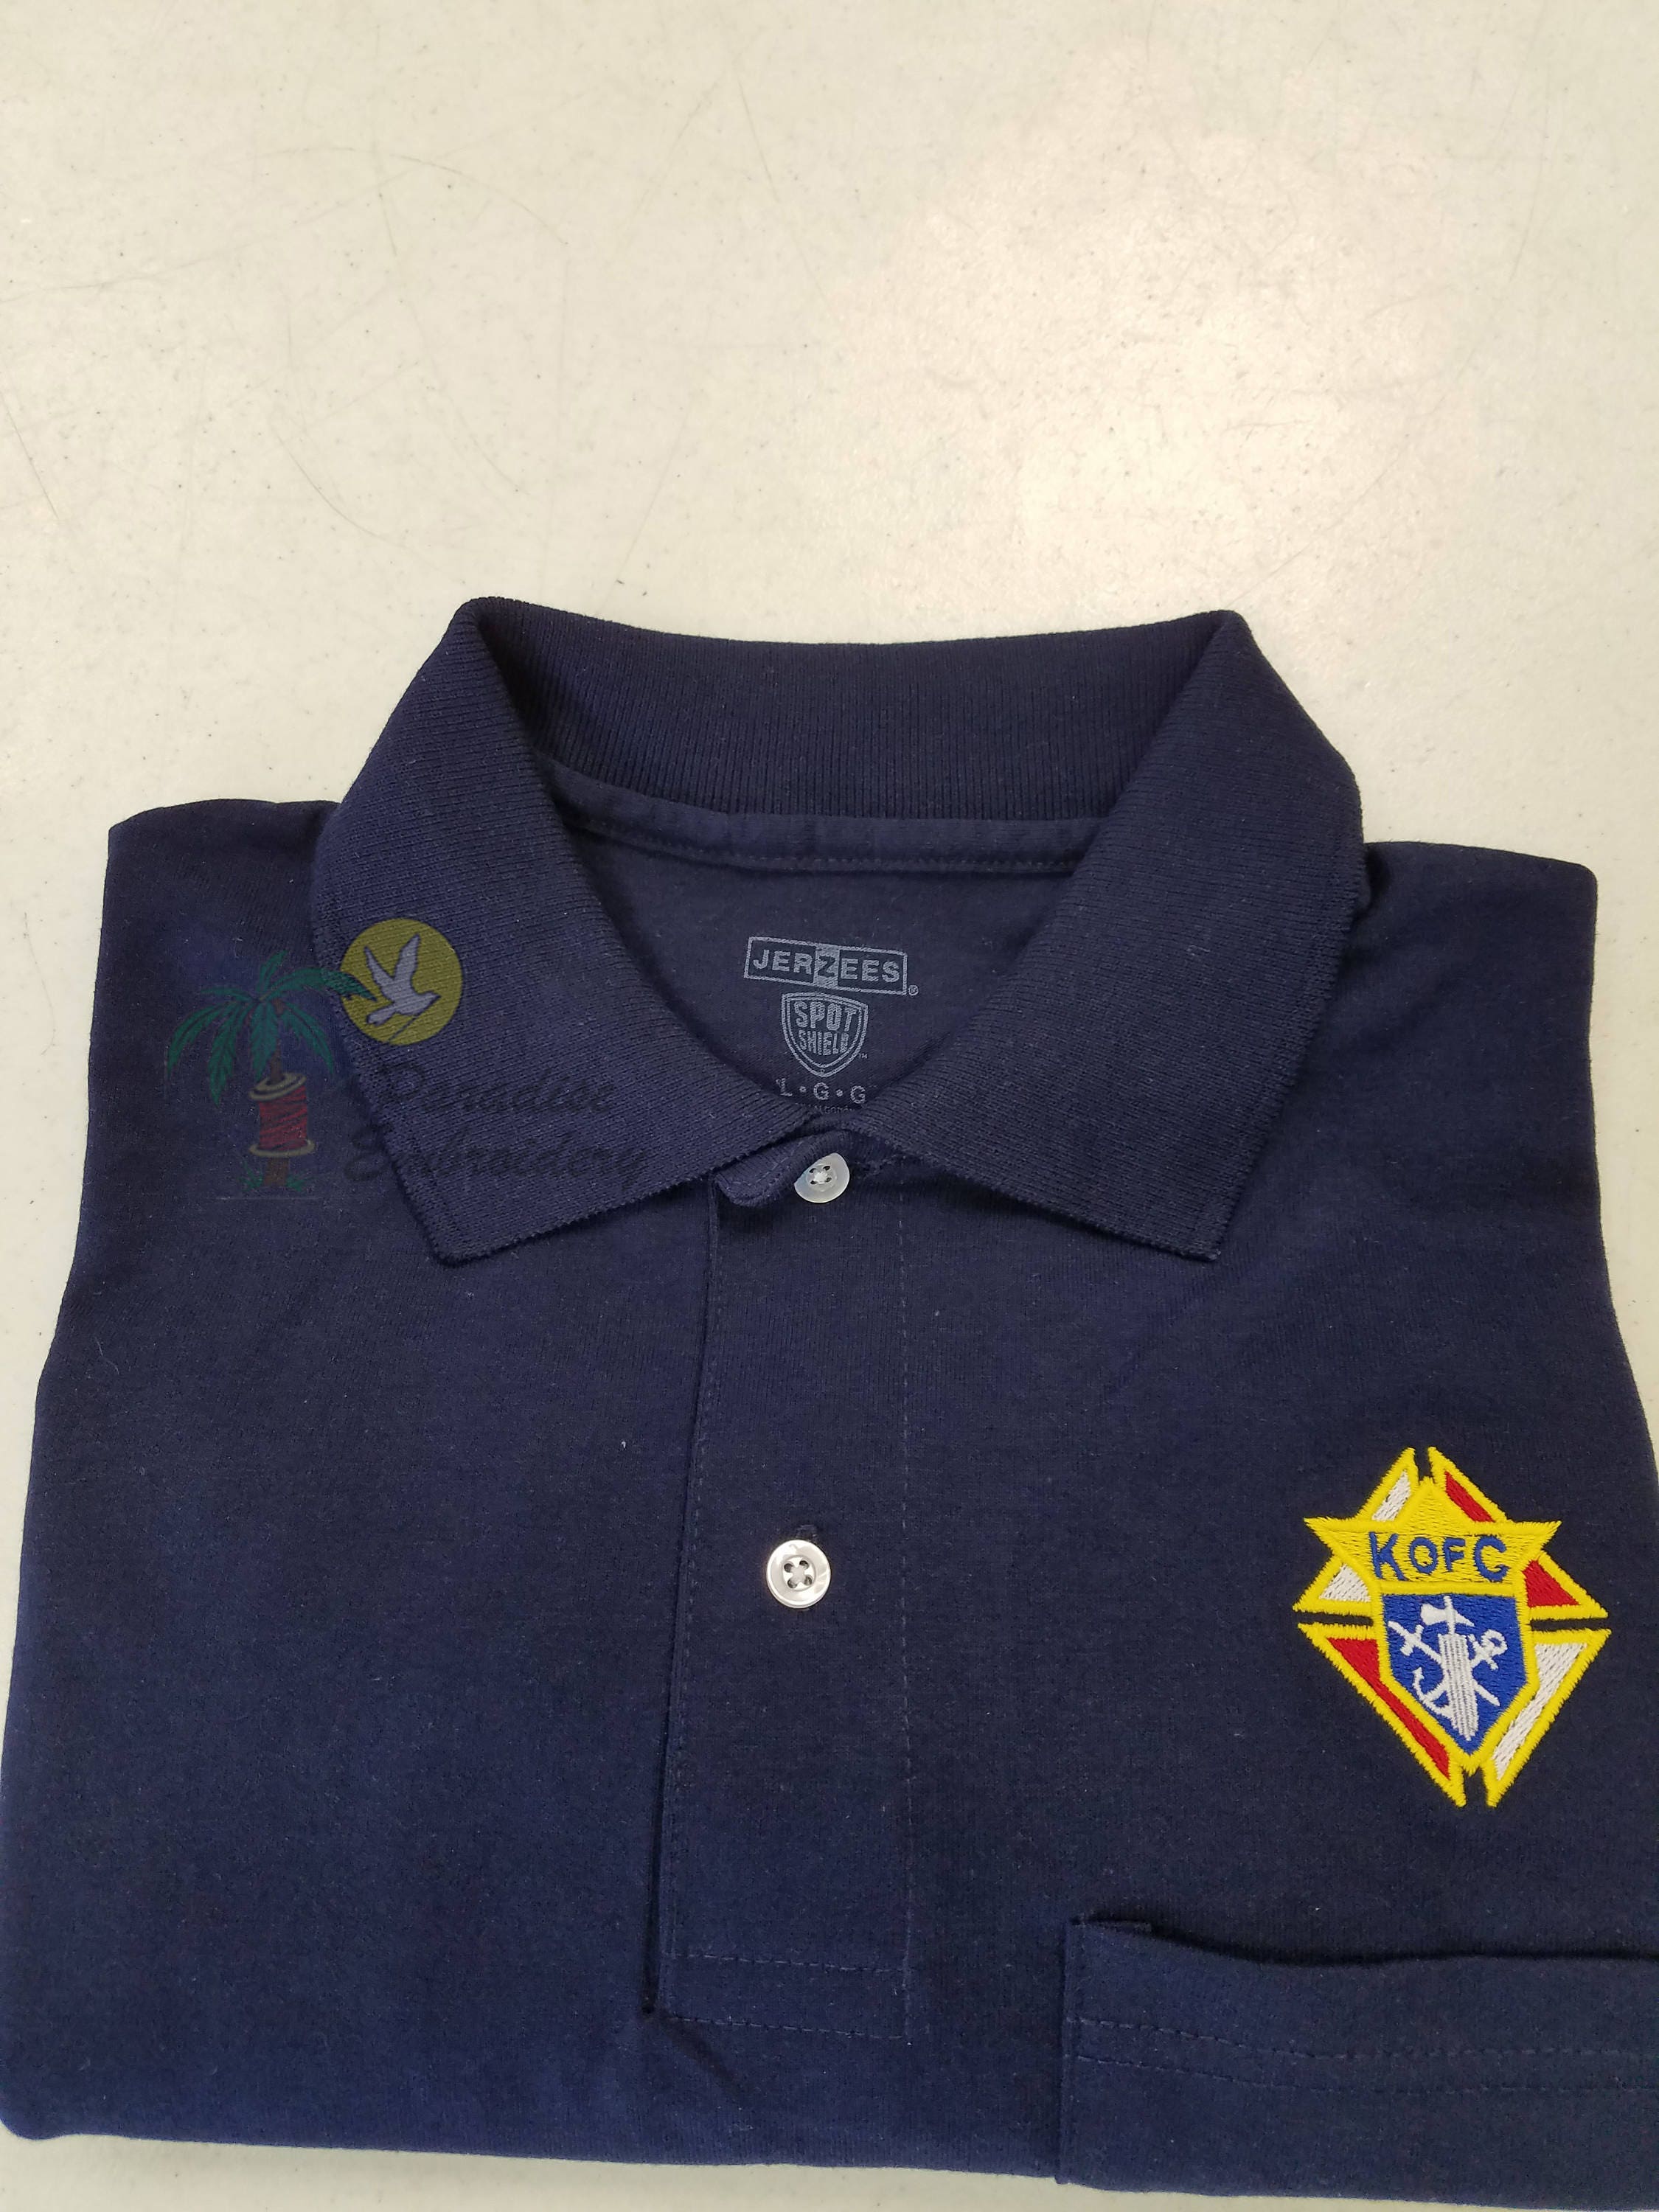 Knights of columbus pocket polo shirt with logo only.